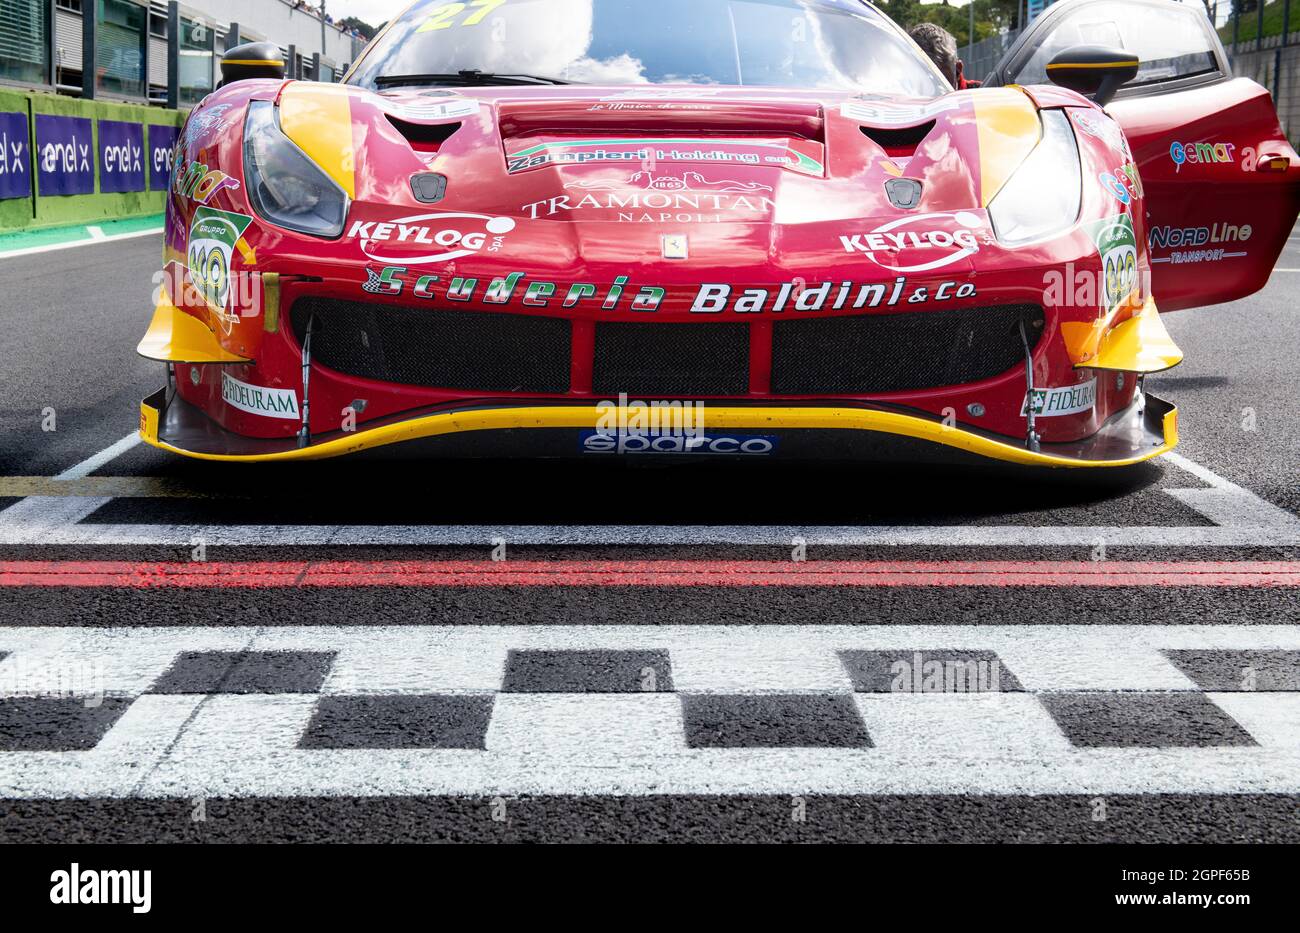 Vallelunga, italy september 19th 2021 Aci racing weekend. Red Ferrari 488 GT low angle view close up on asphalt circuit checkered line Stock Photo